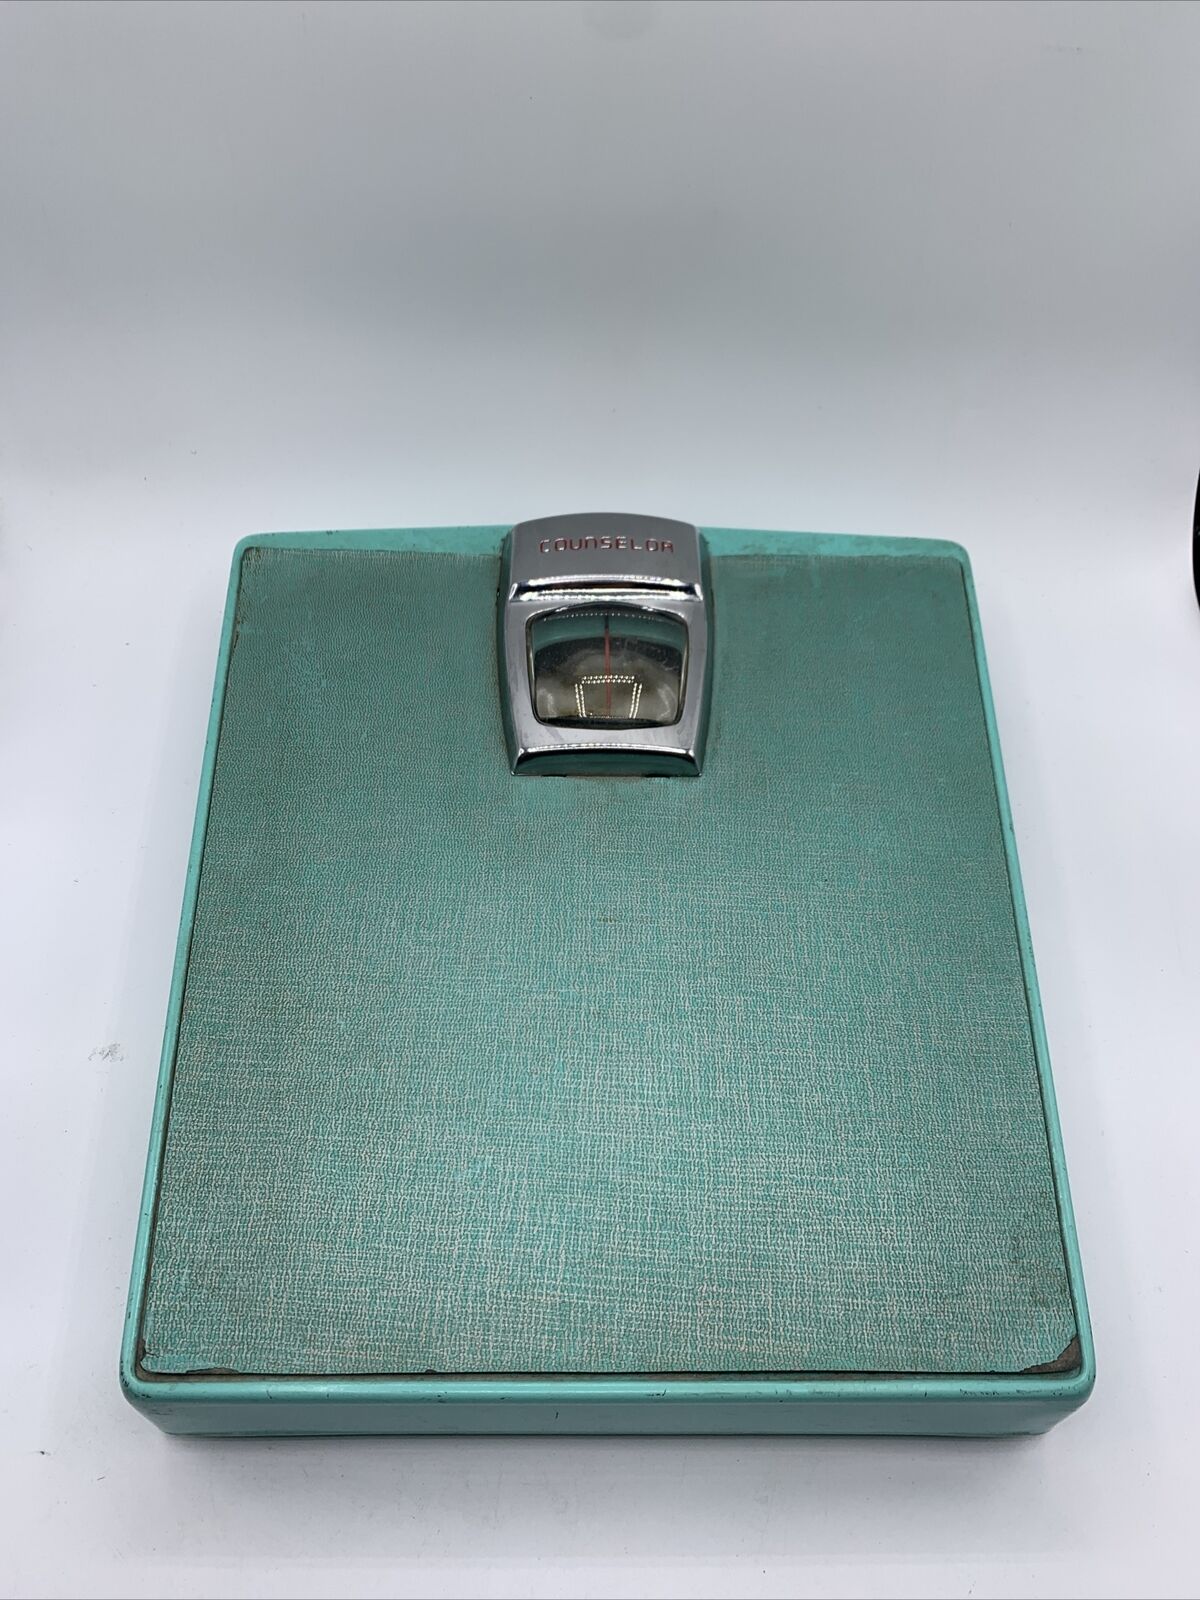 Vintage The Brearley Company Mid Century Counselor Blue/green Bathroom Scale